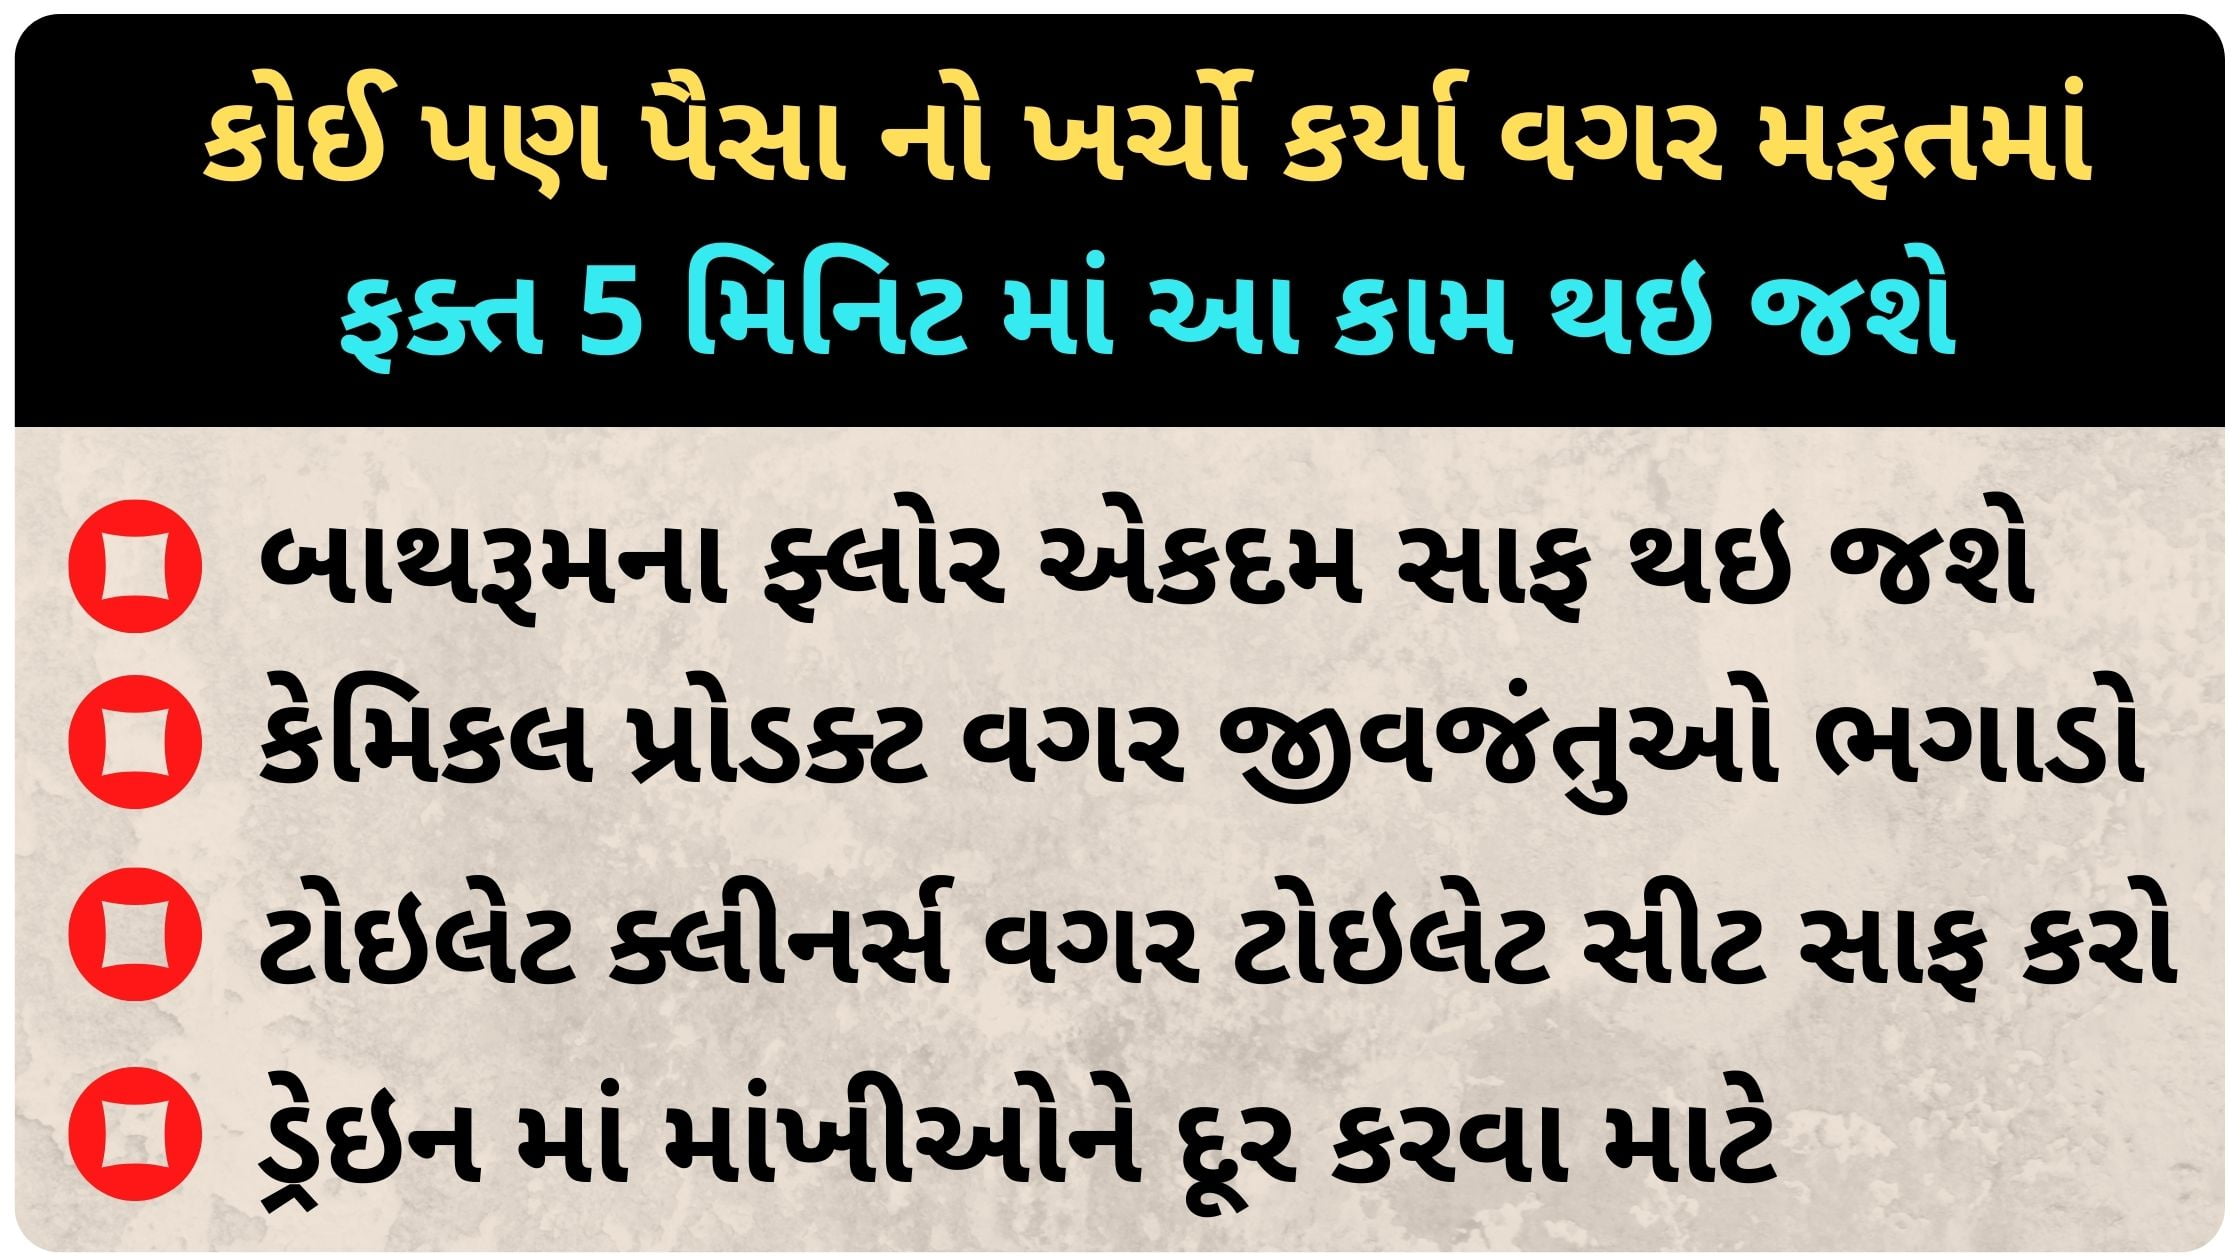 Detergent solution uses in gujarati